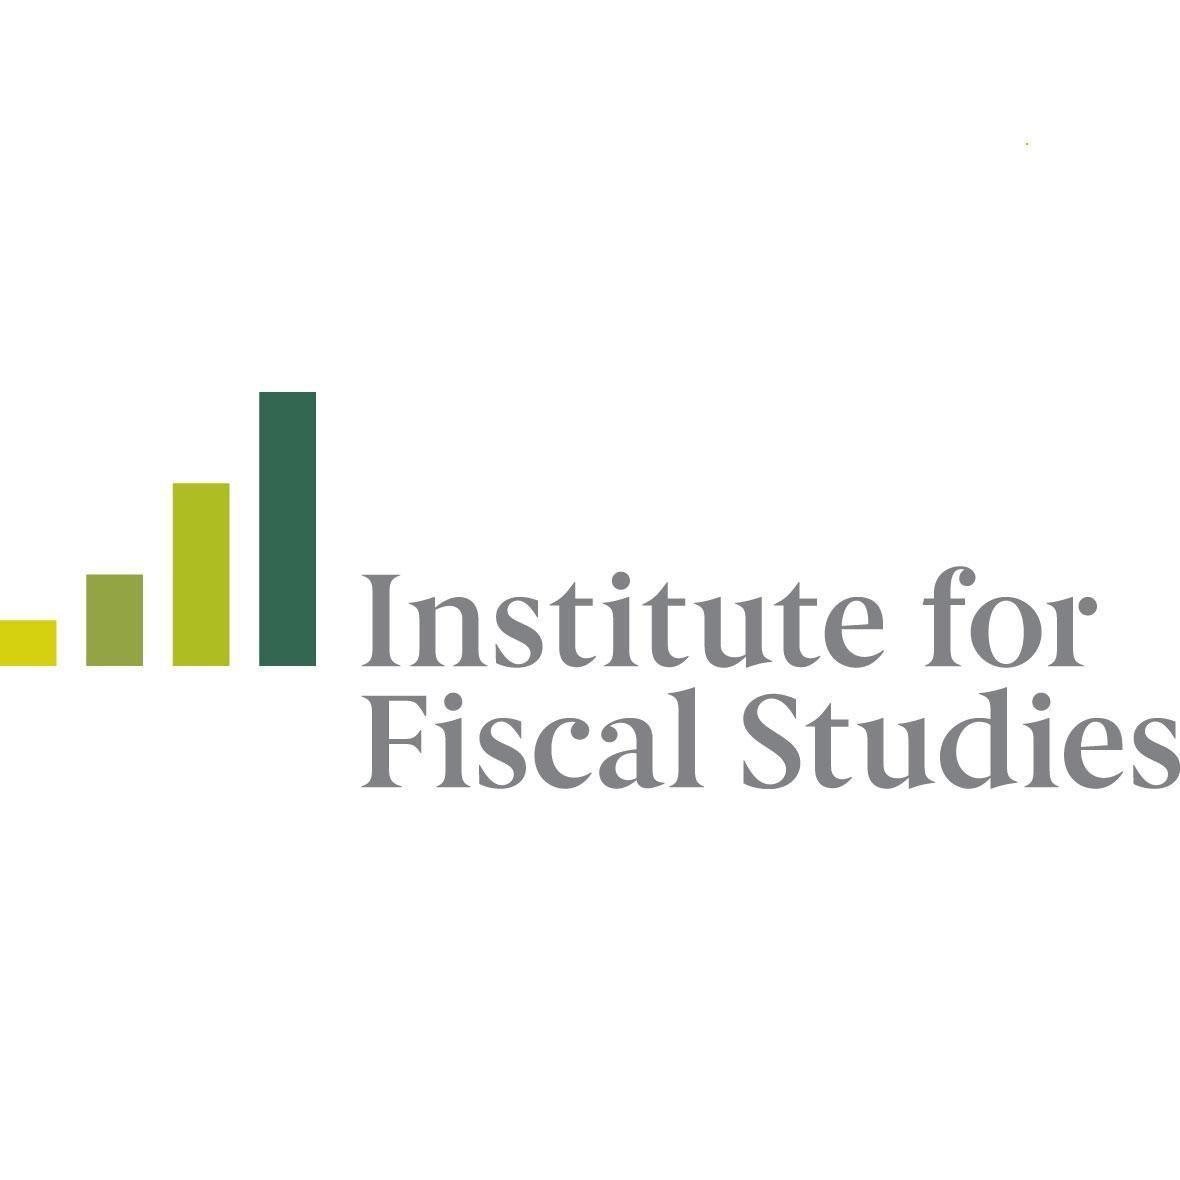 IFS Logo - Institute For Fiscal Studies